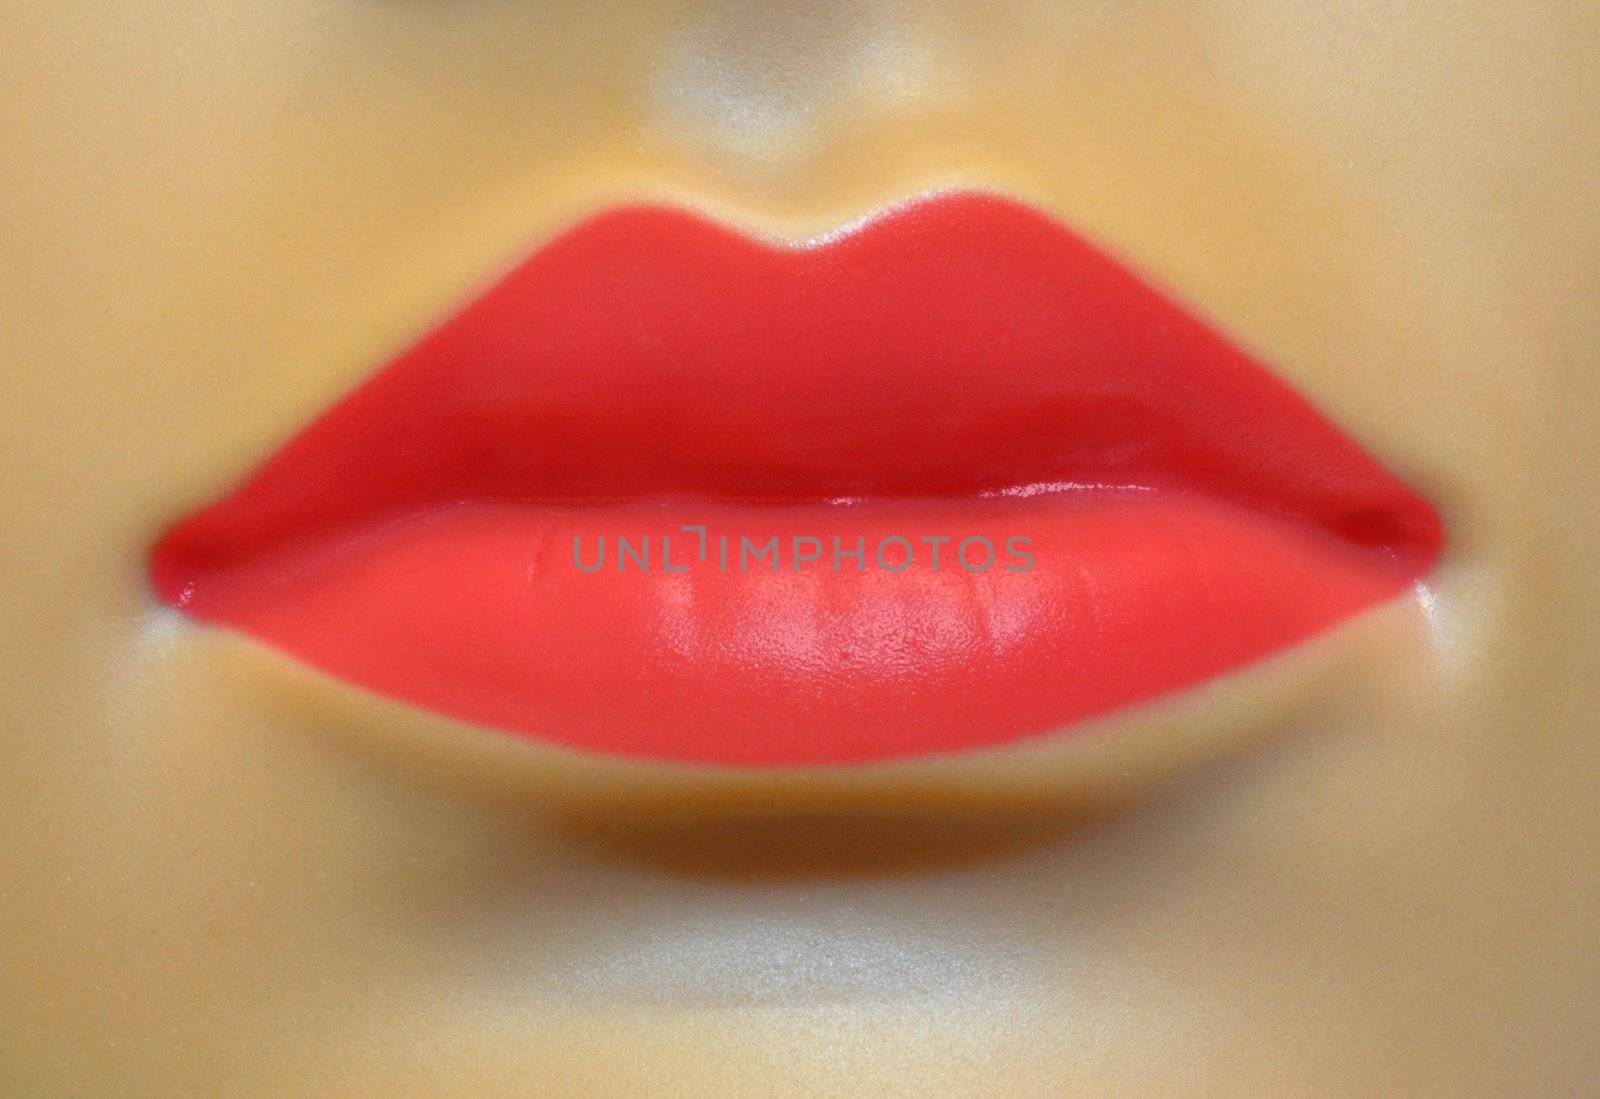 Mannequin lips in close up